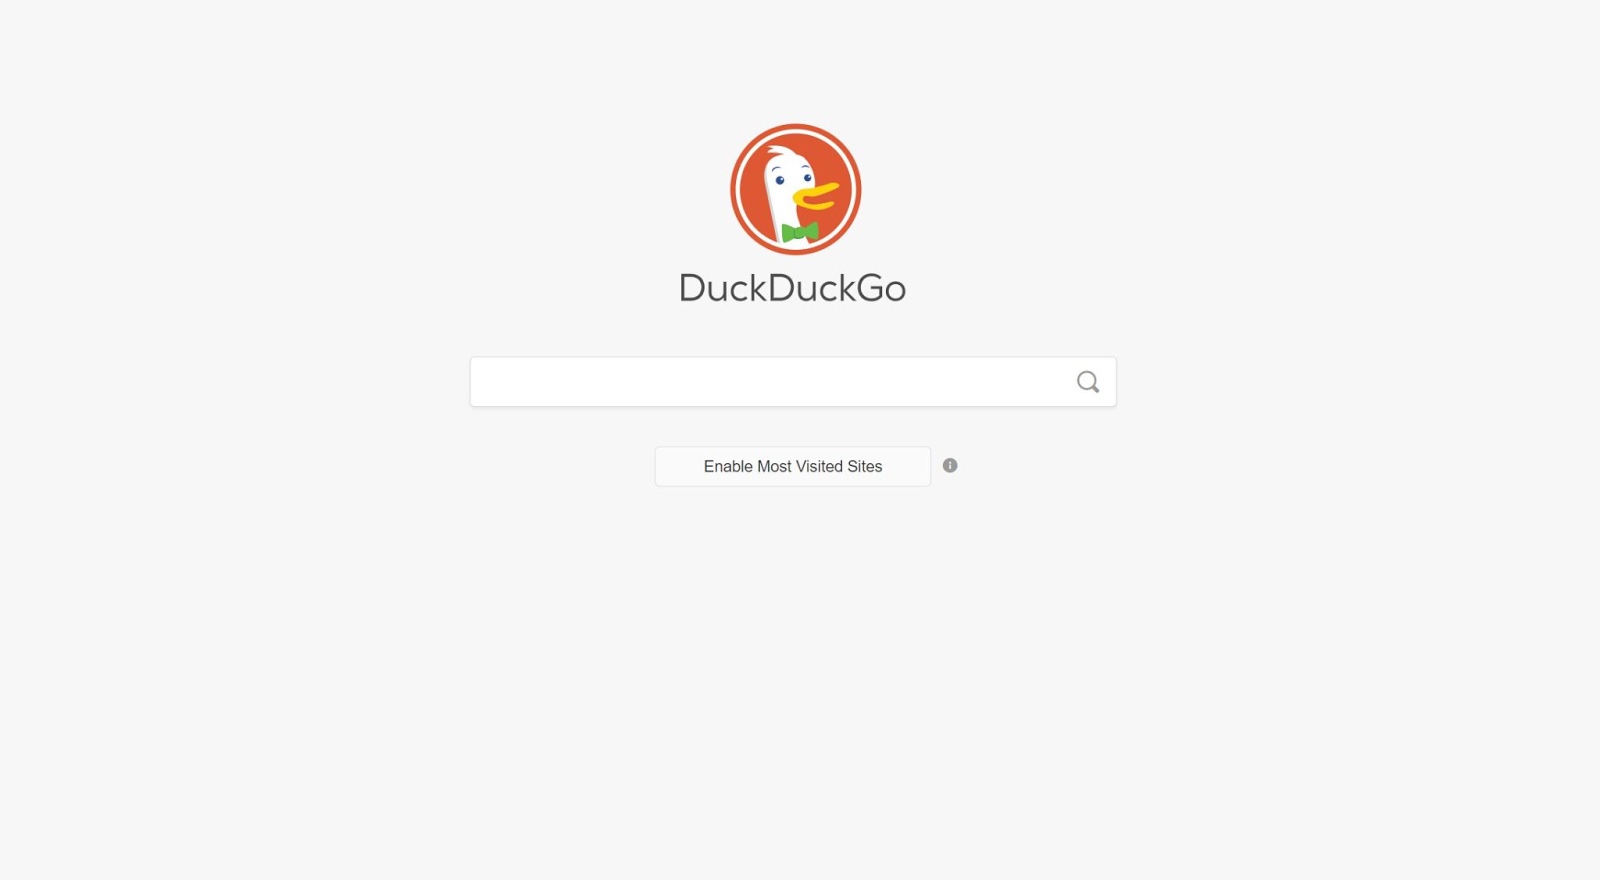 Customize your DuckDuckGo experience and allow you to view your most visited websites.